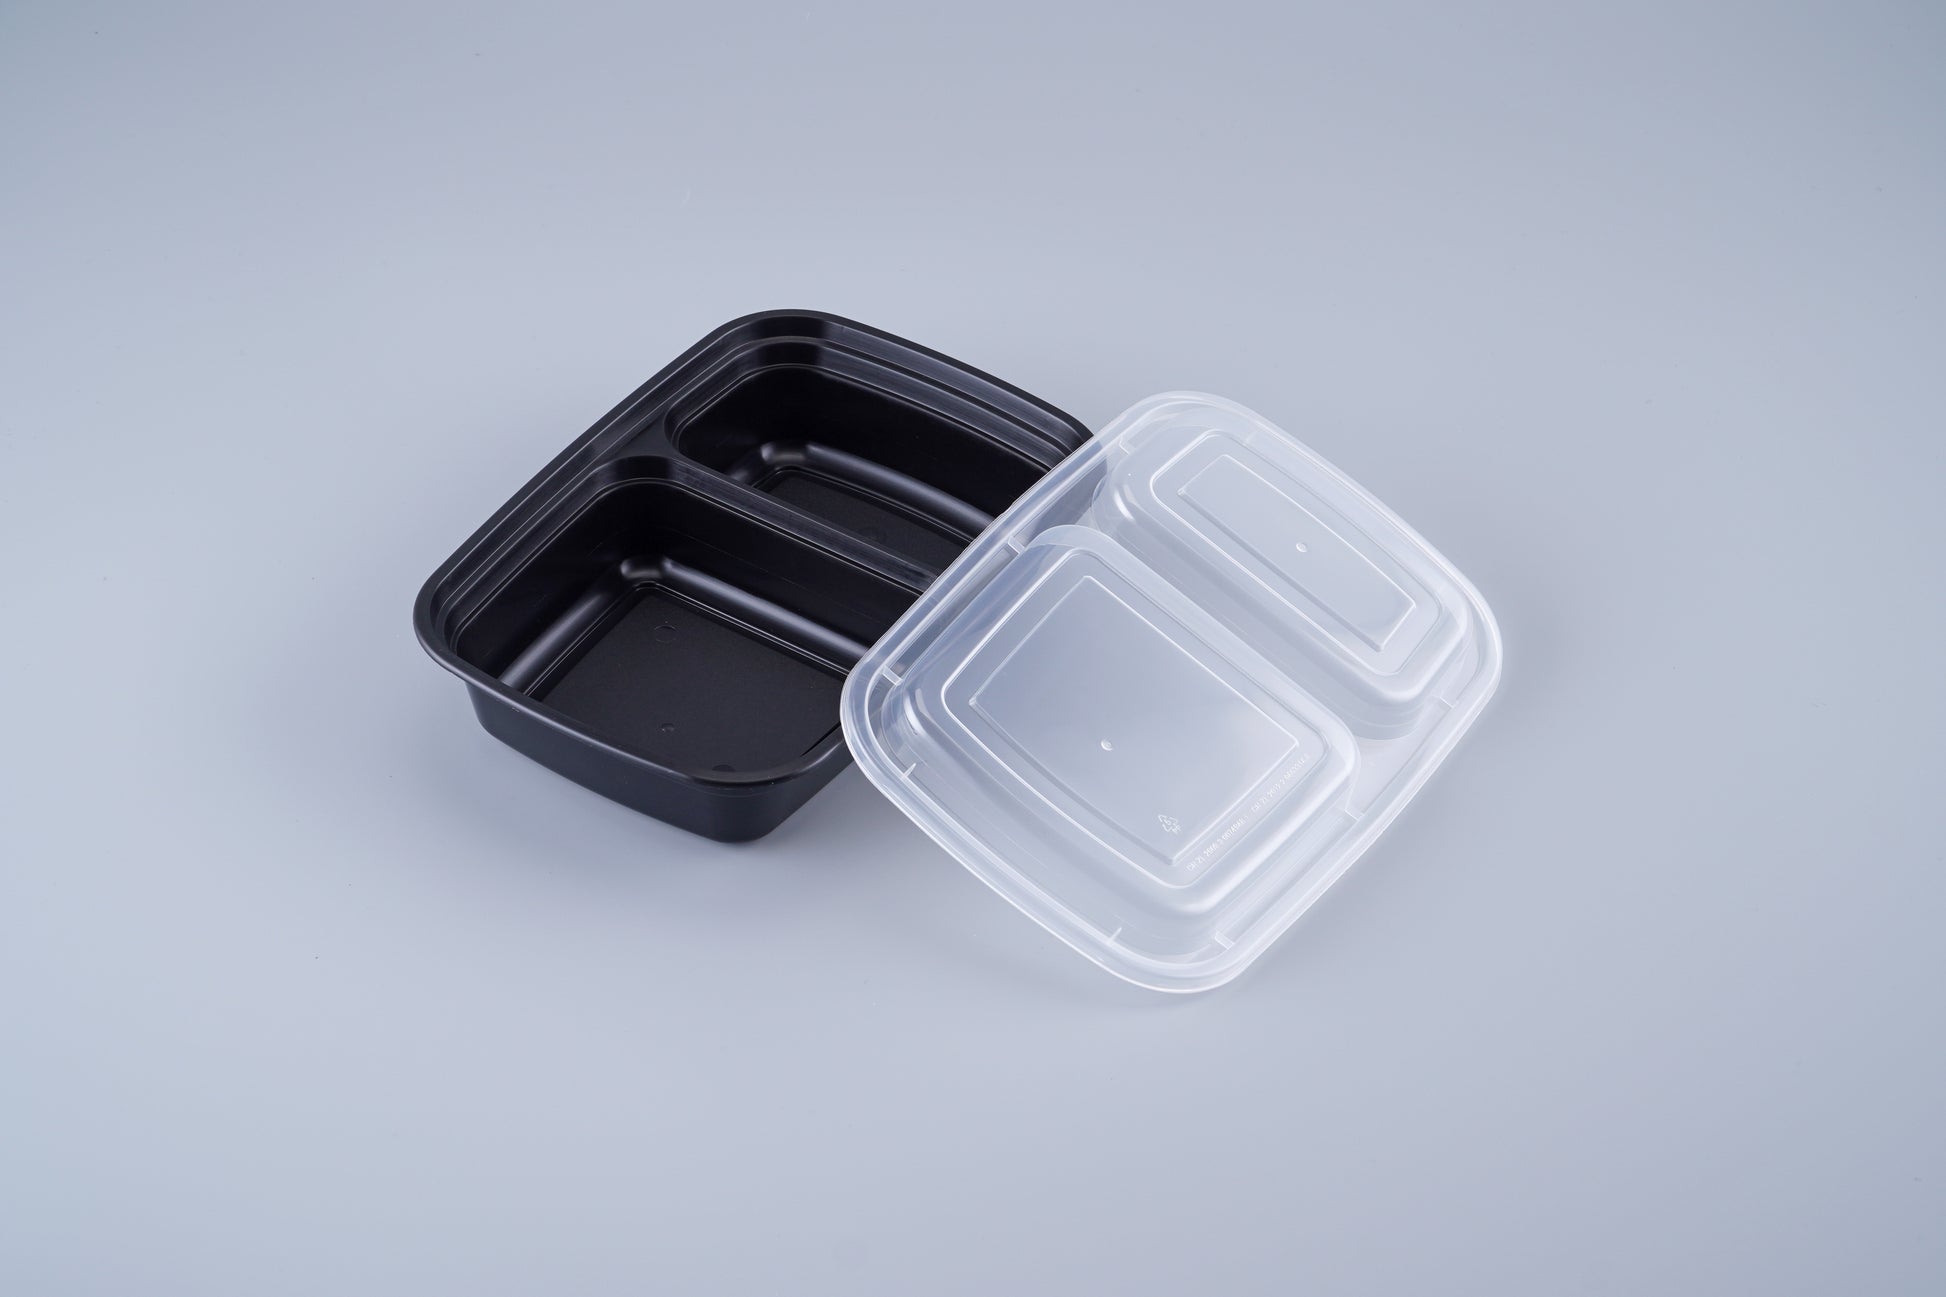 Heavy Weight 32 oz Deli Container with Lids (4 Count)